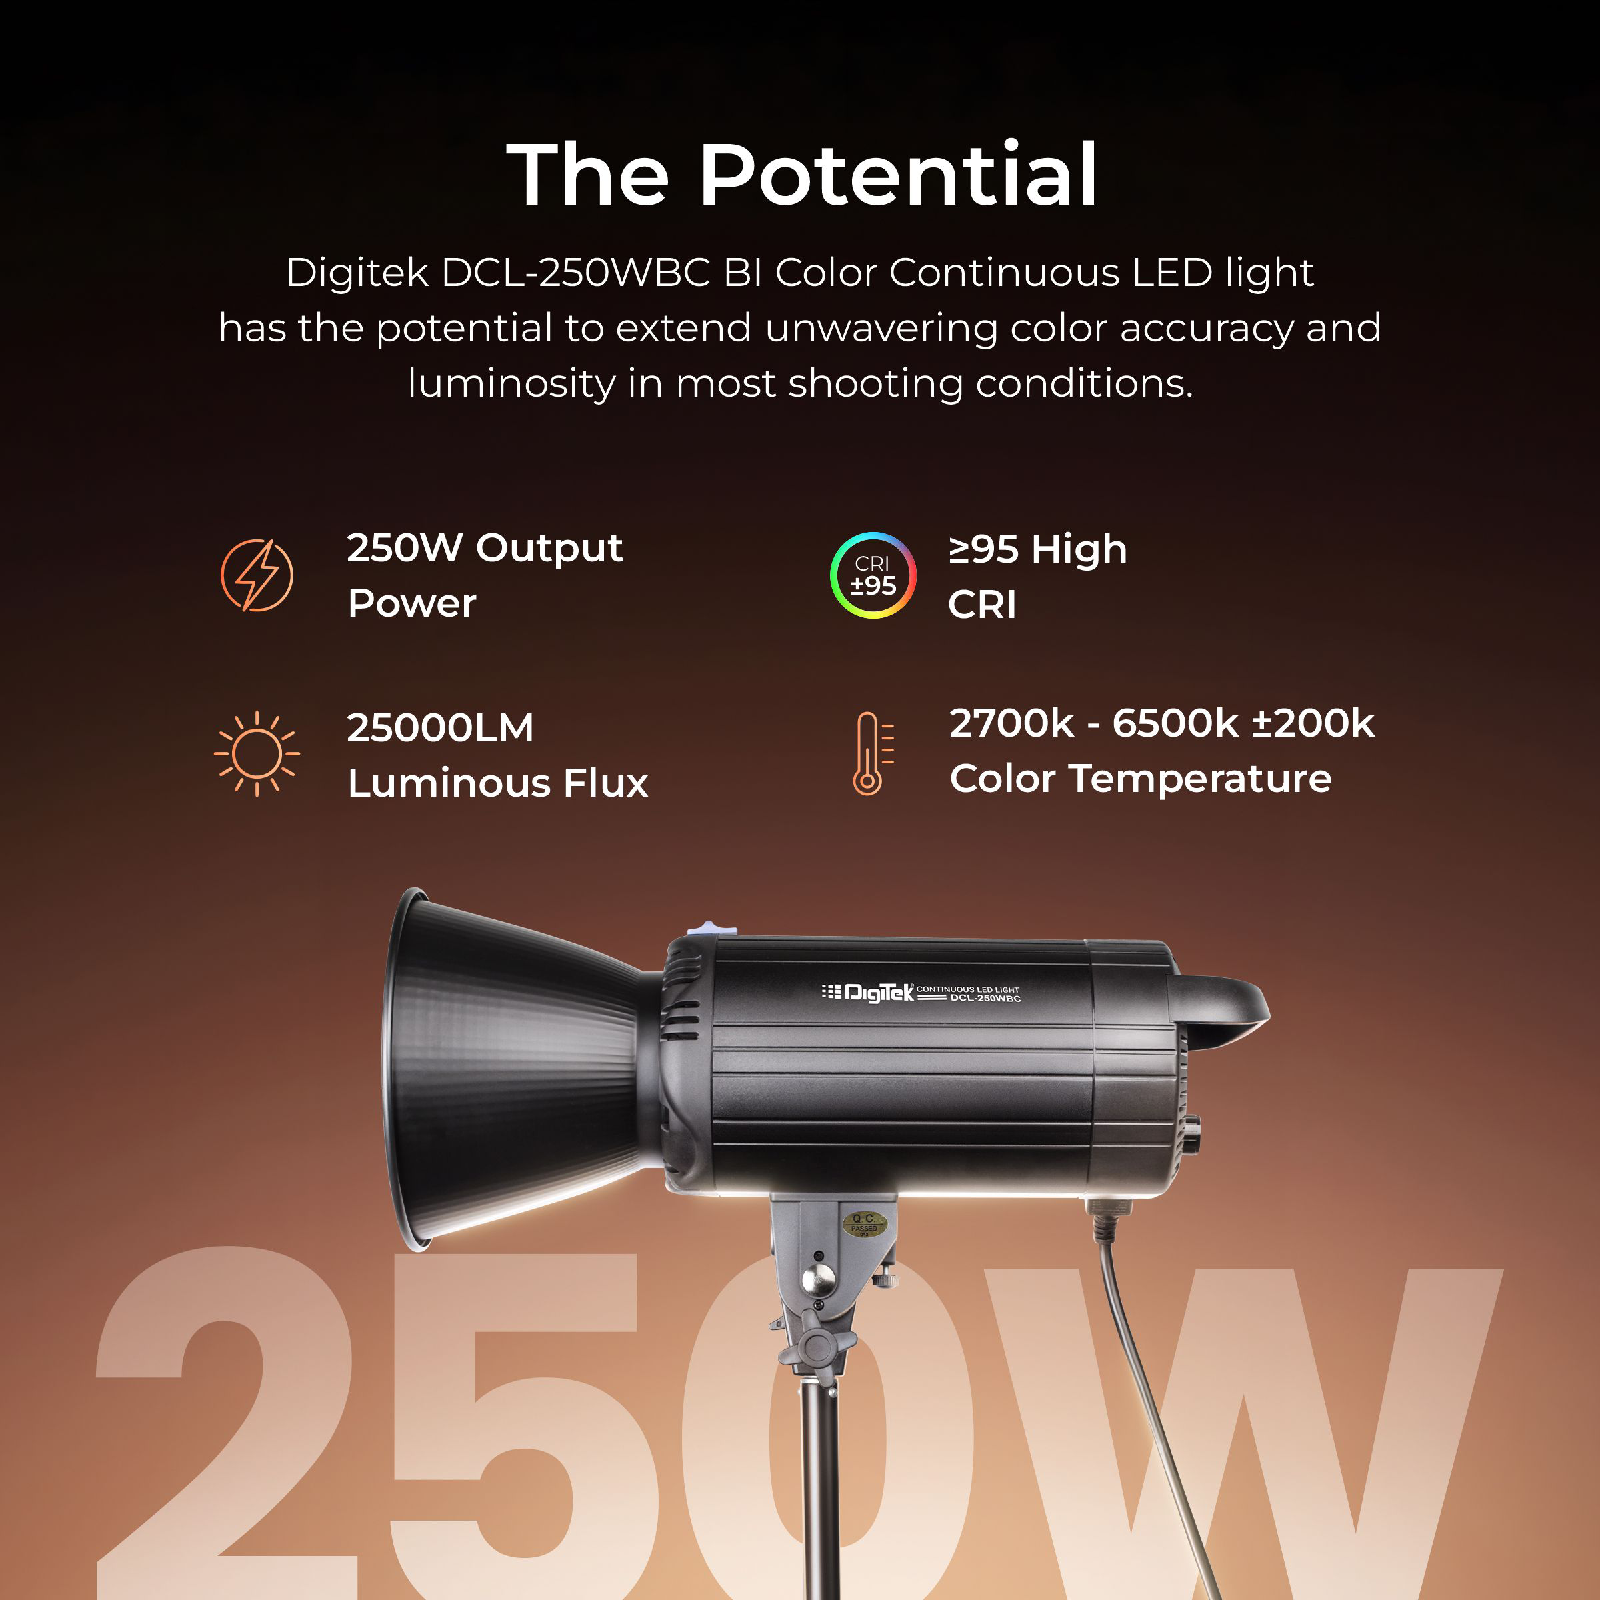 Digitek (DCL-250 WBC) BI Color Continuous LED Photo/Video Light Suitable for All Kinds of Small Production Photography / Power Saving & Environment Protection